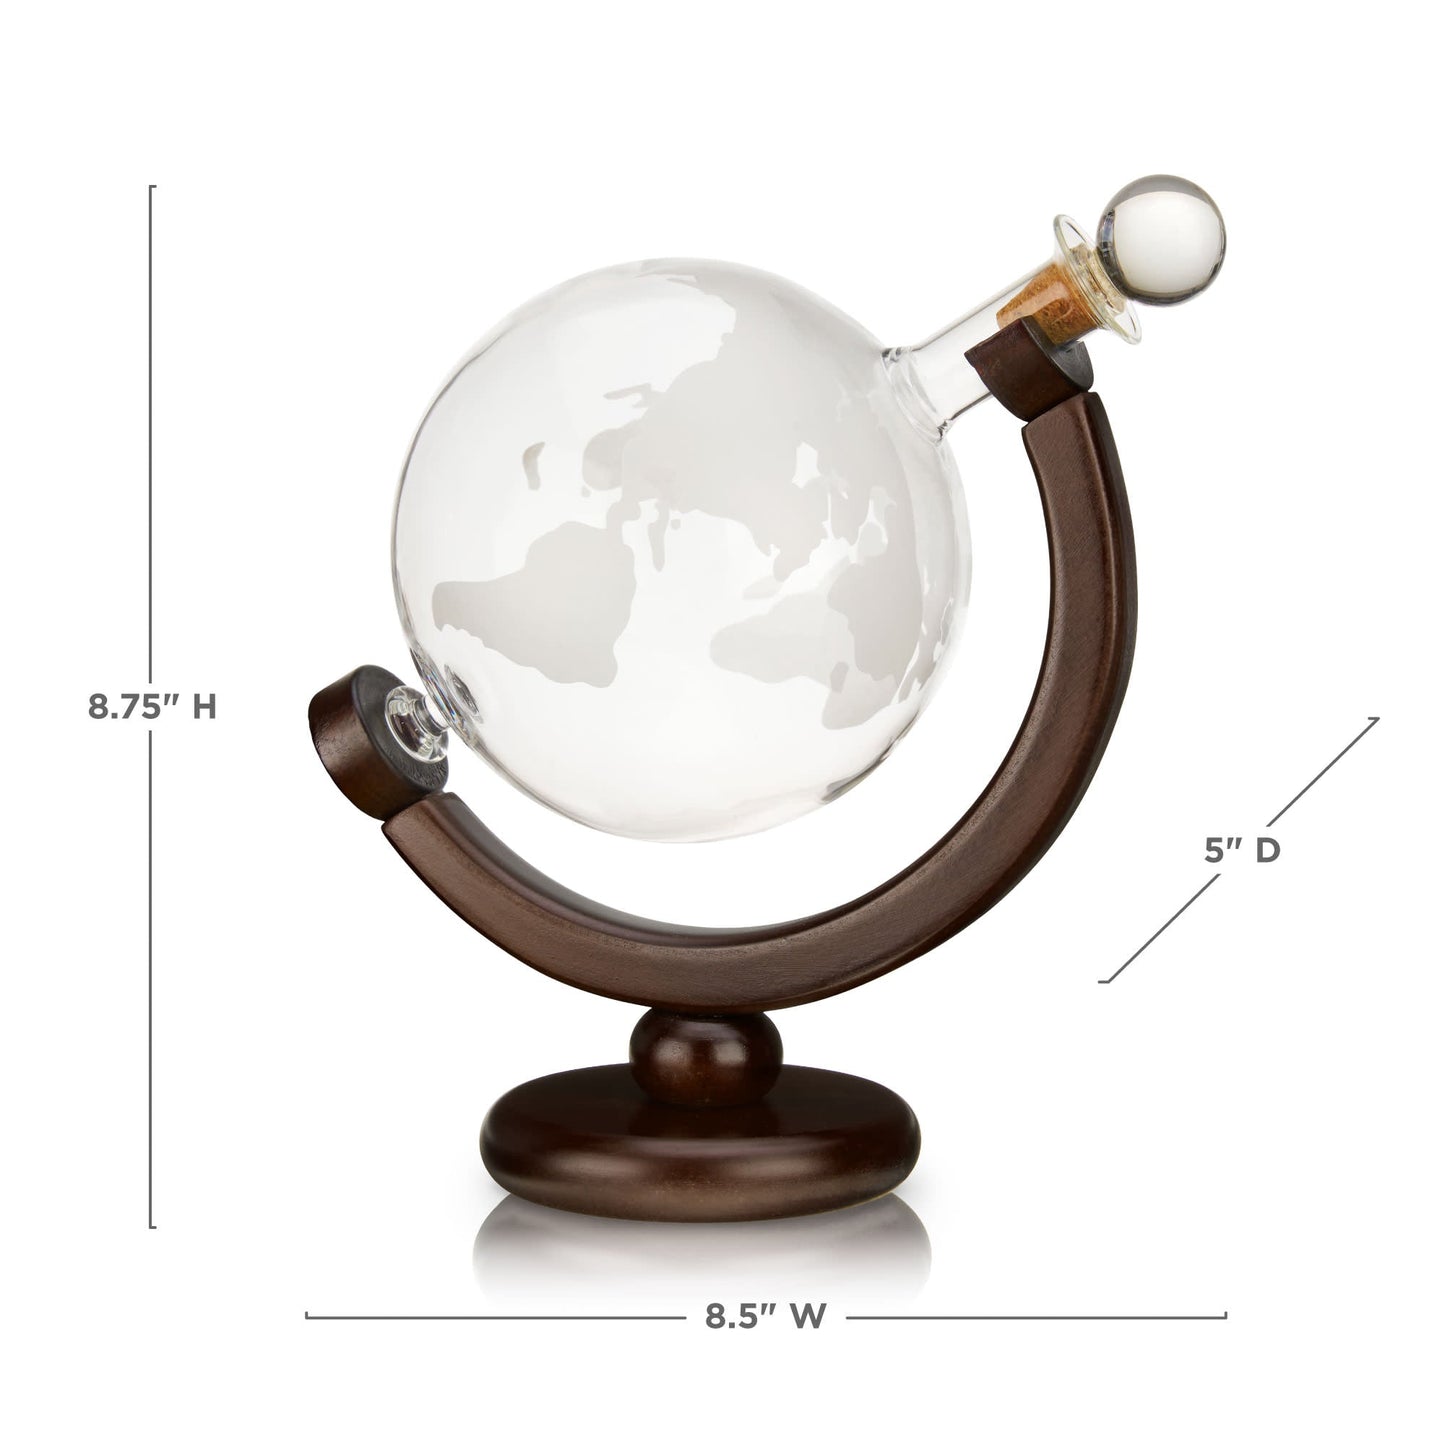 NTH Globe Decanter | Not That High